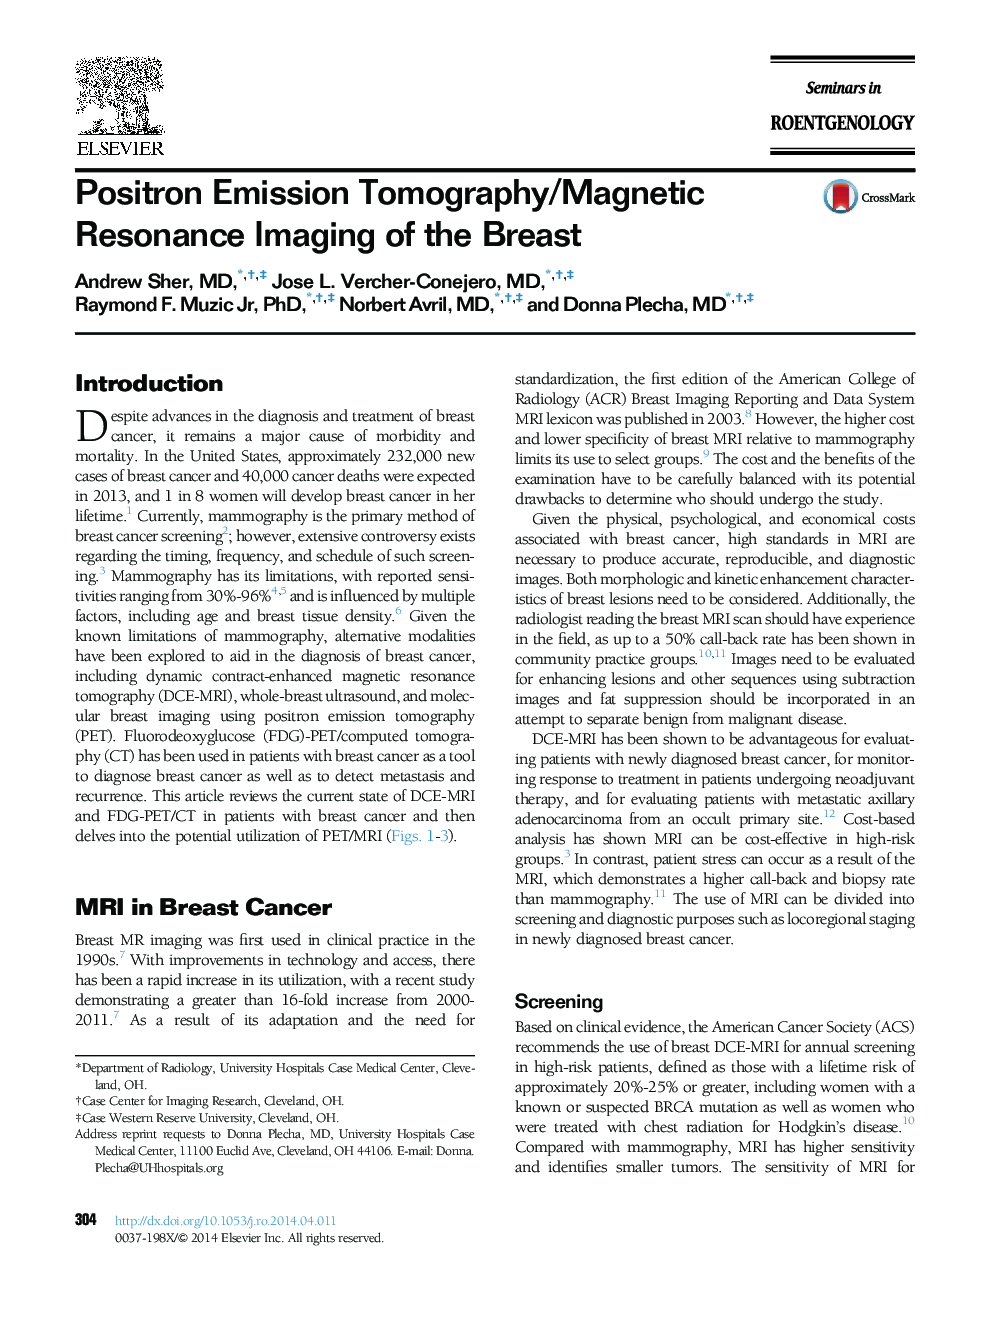 Positron Emission Tomography/Magnetic Resonance Imaging of the Breast